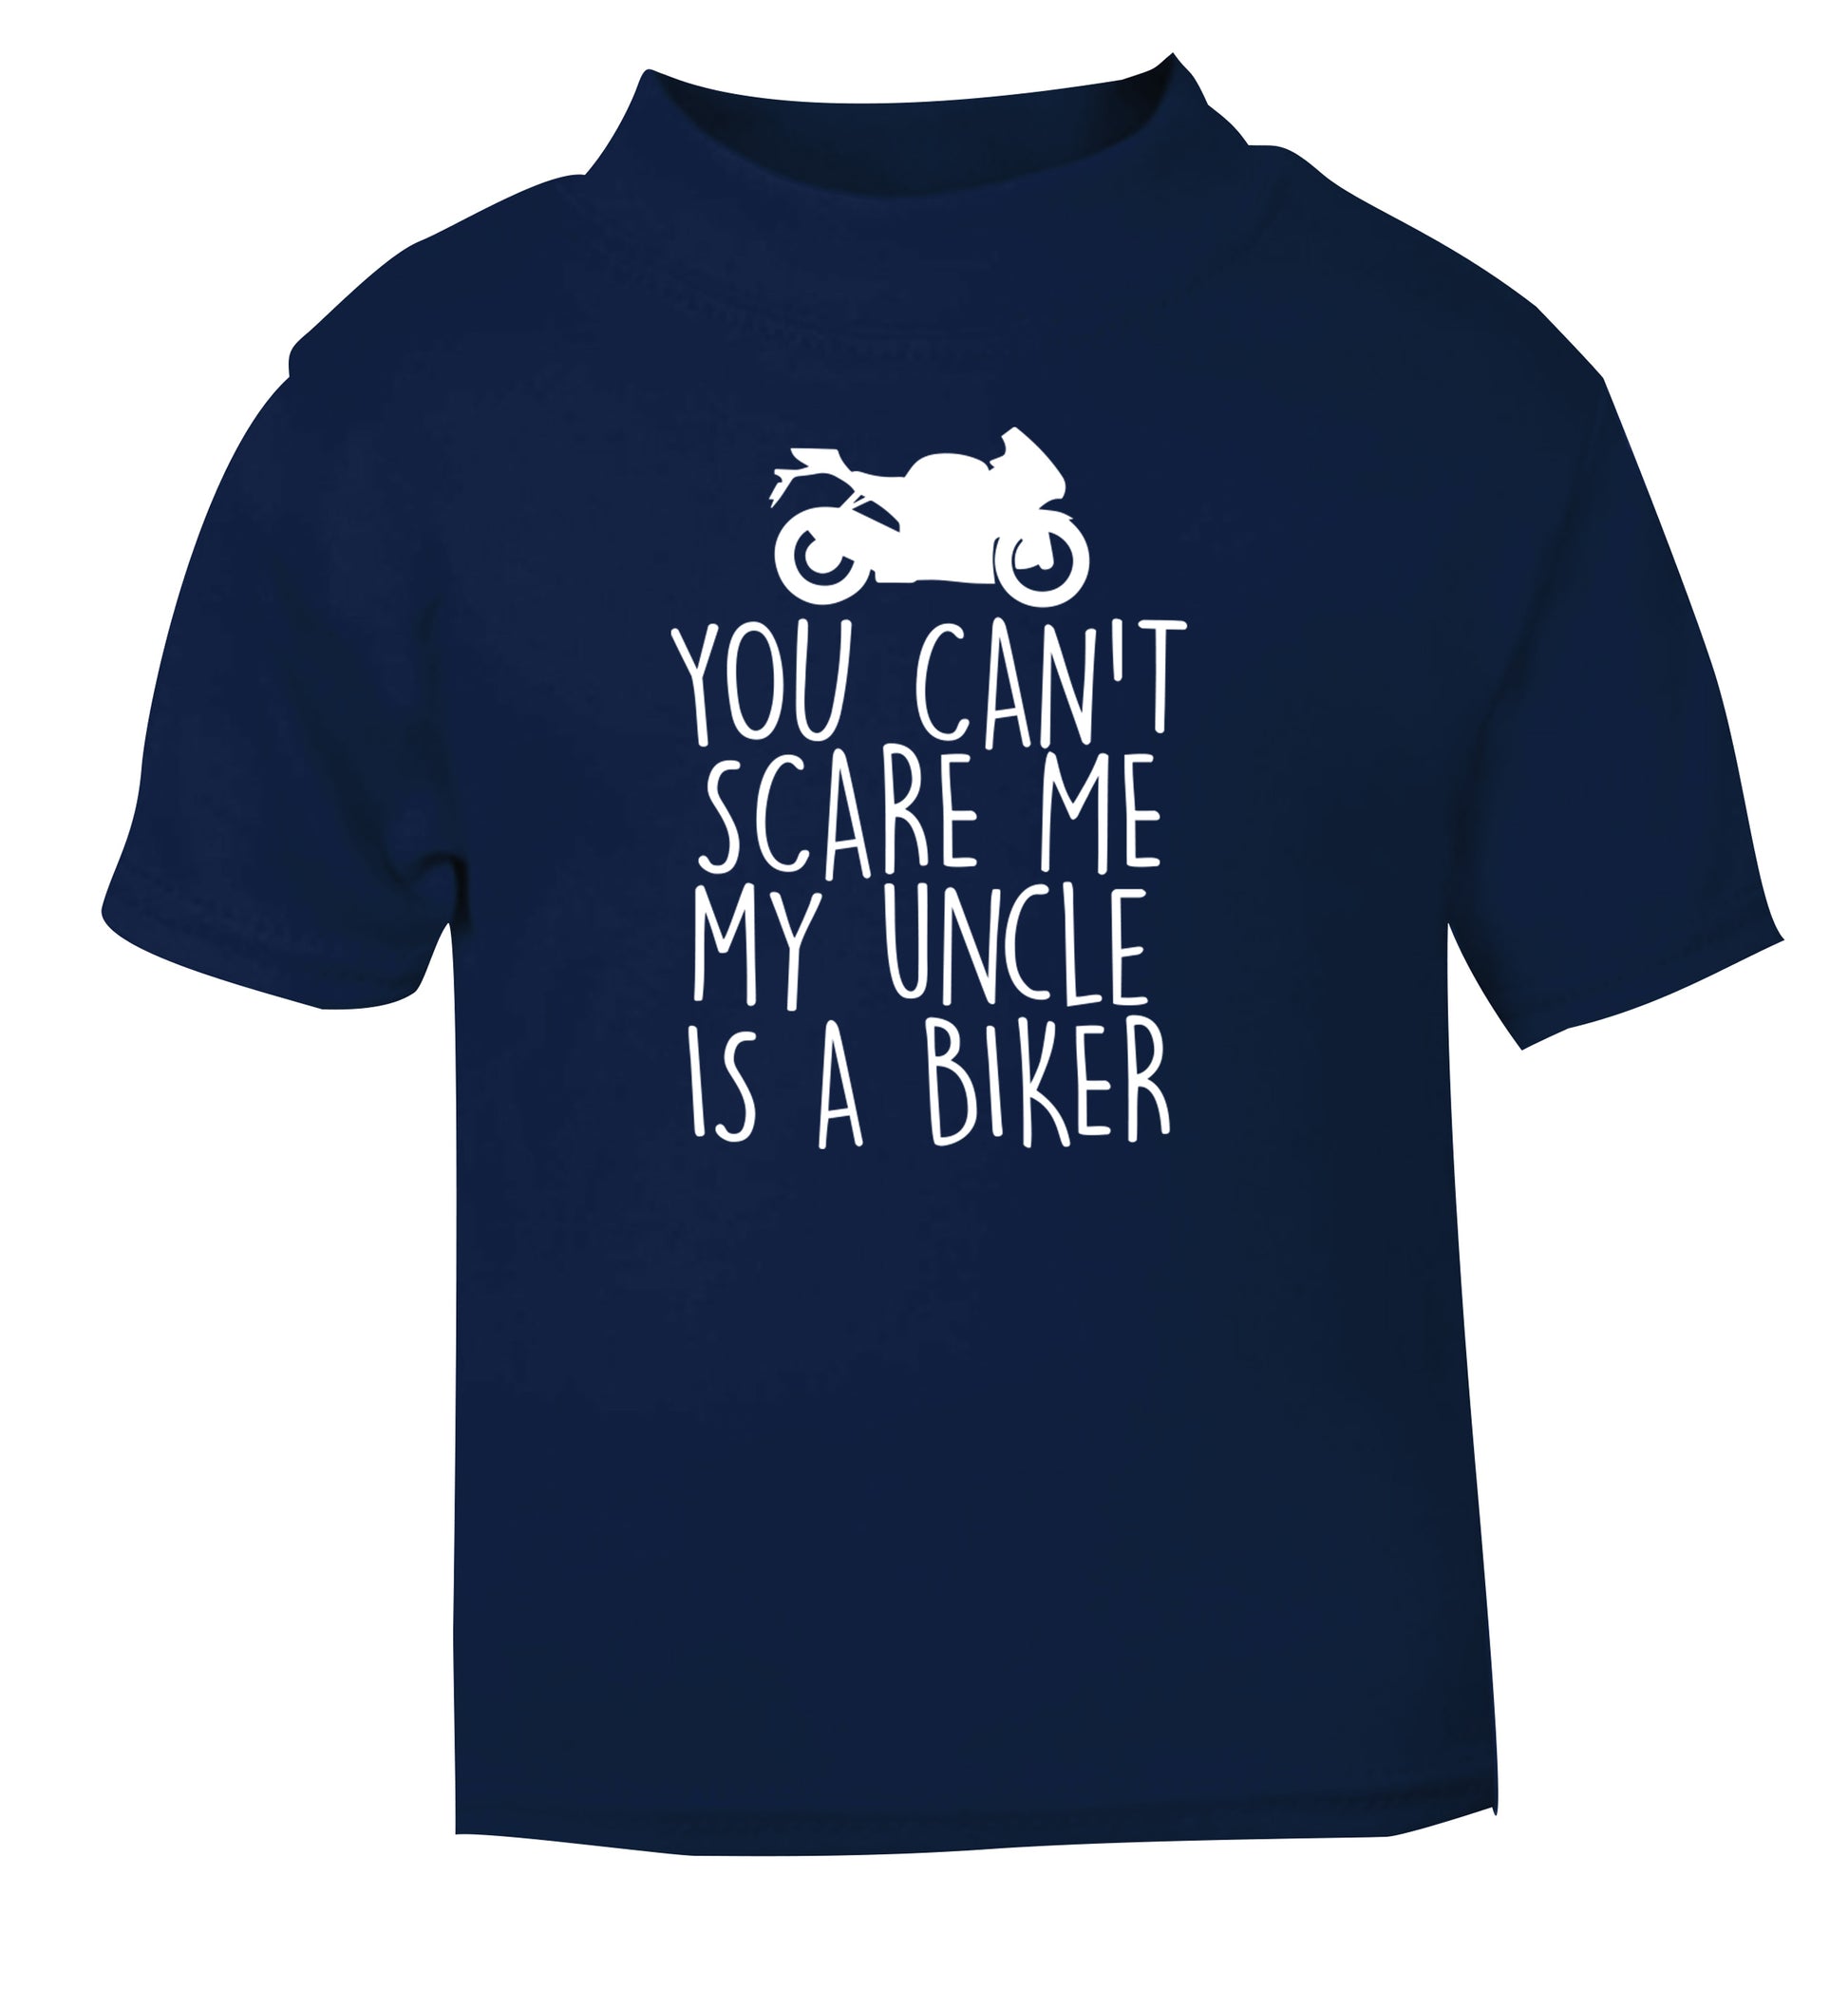 You can't scare me my uncle is a biker navy Baby Toddler Tshirt 2 Years